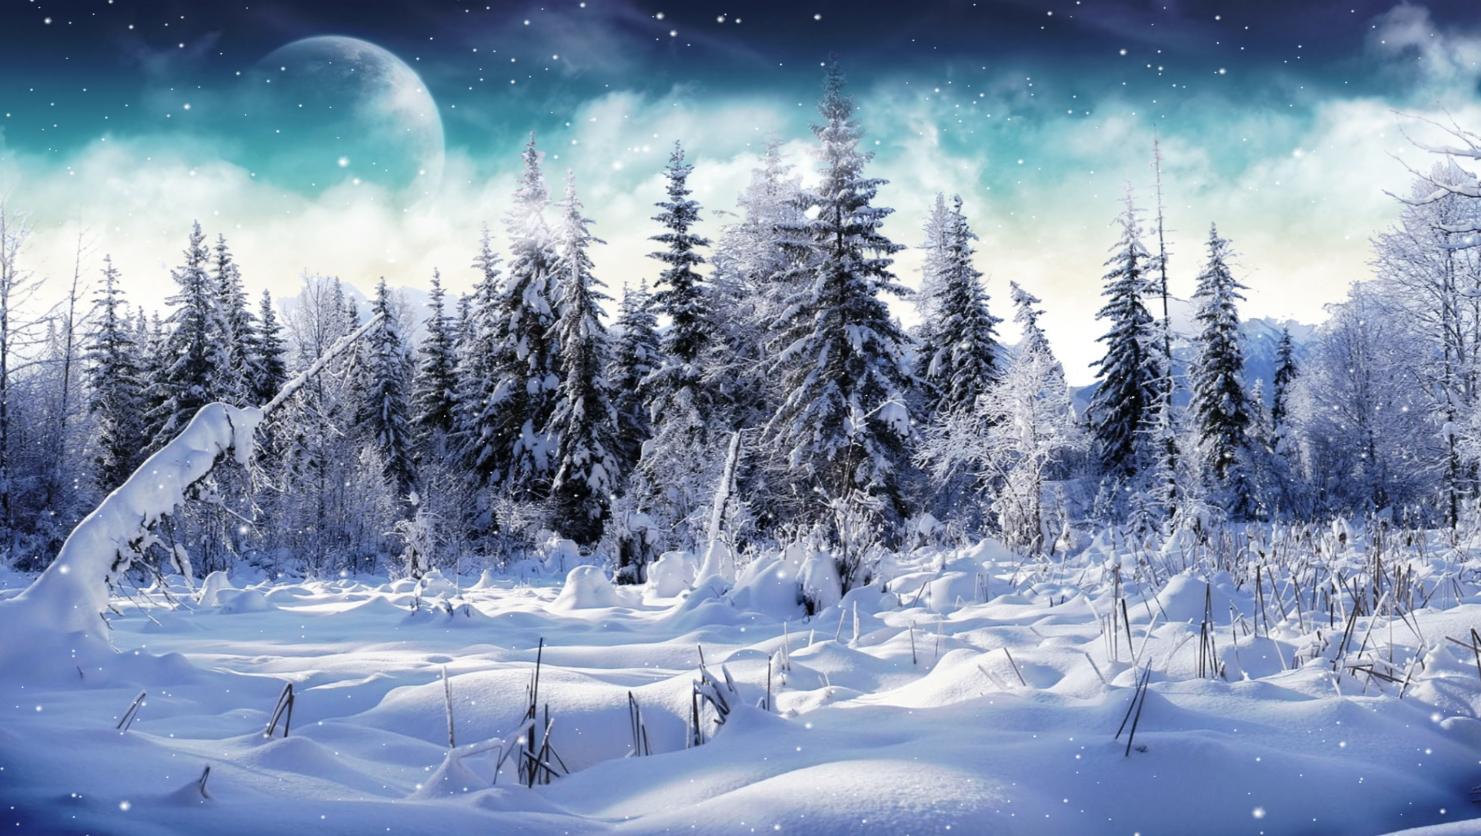 And Enjoy This Cold Winter Screensaver Animated Wallpaper